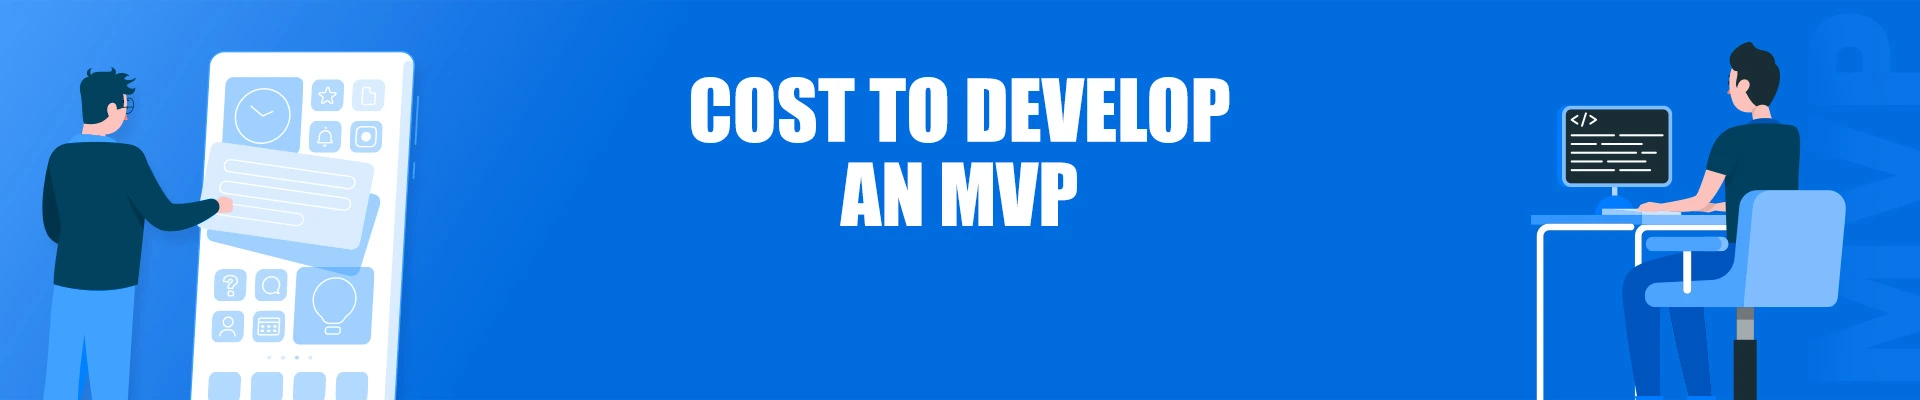 Cost to Develop an MVP